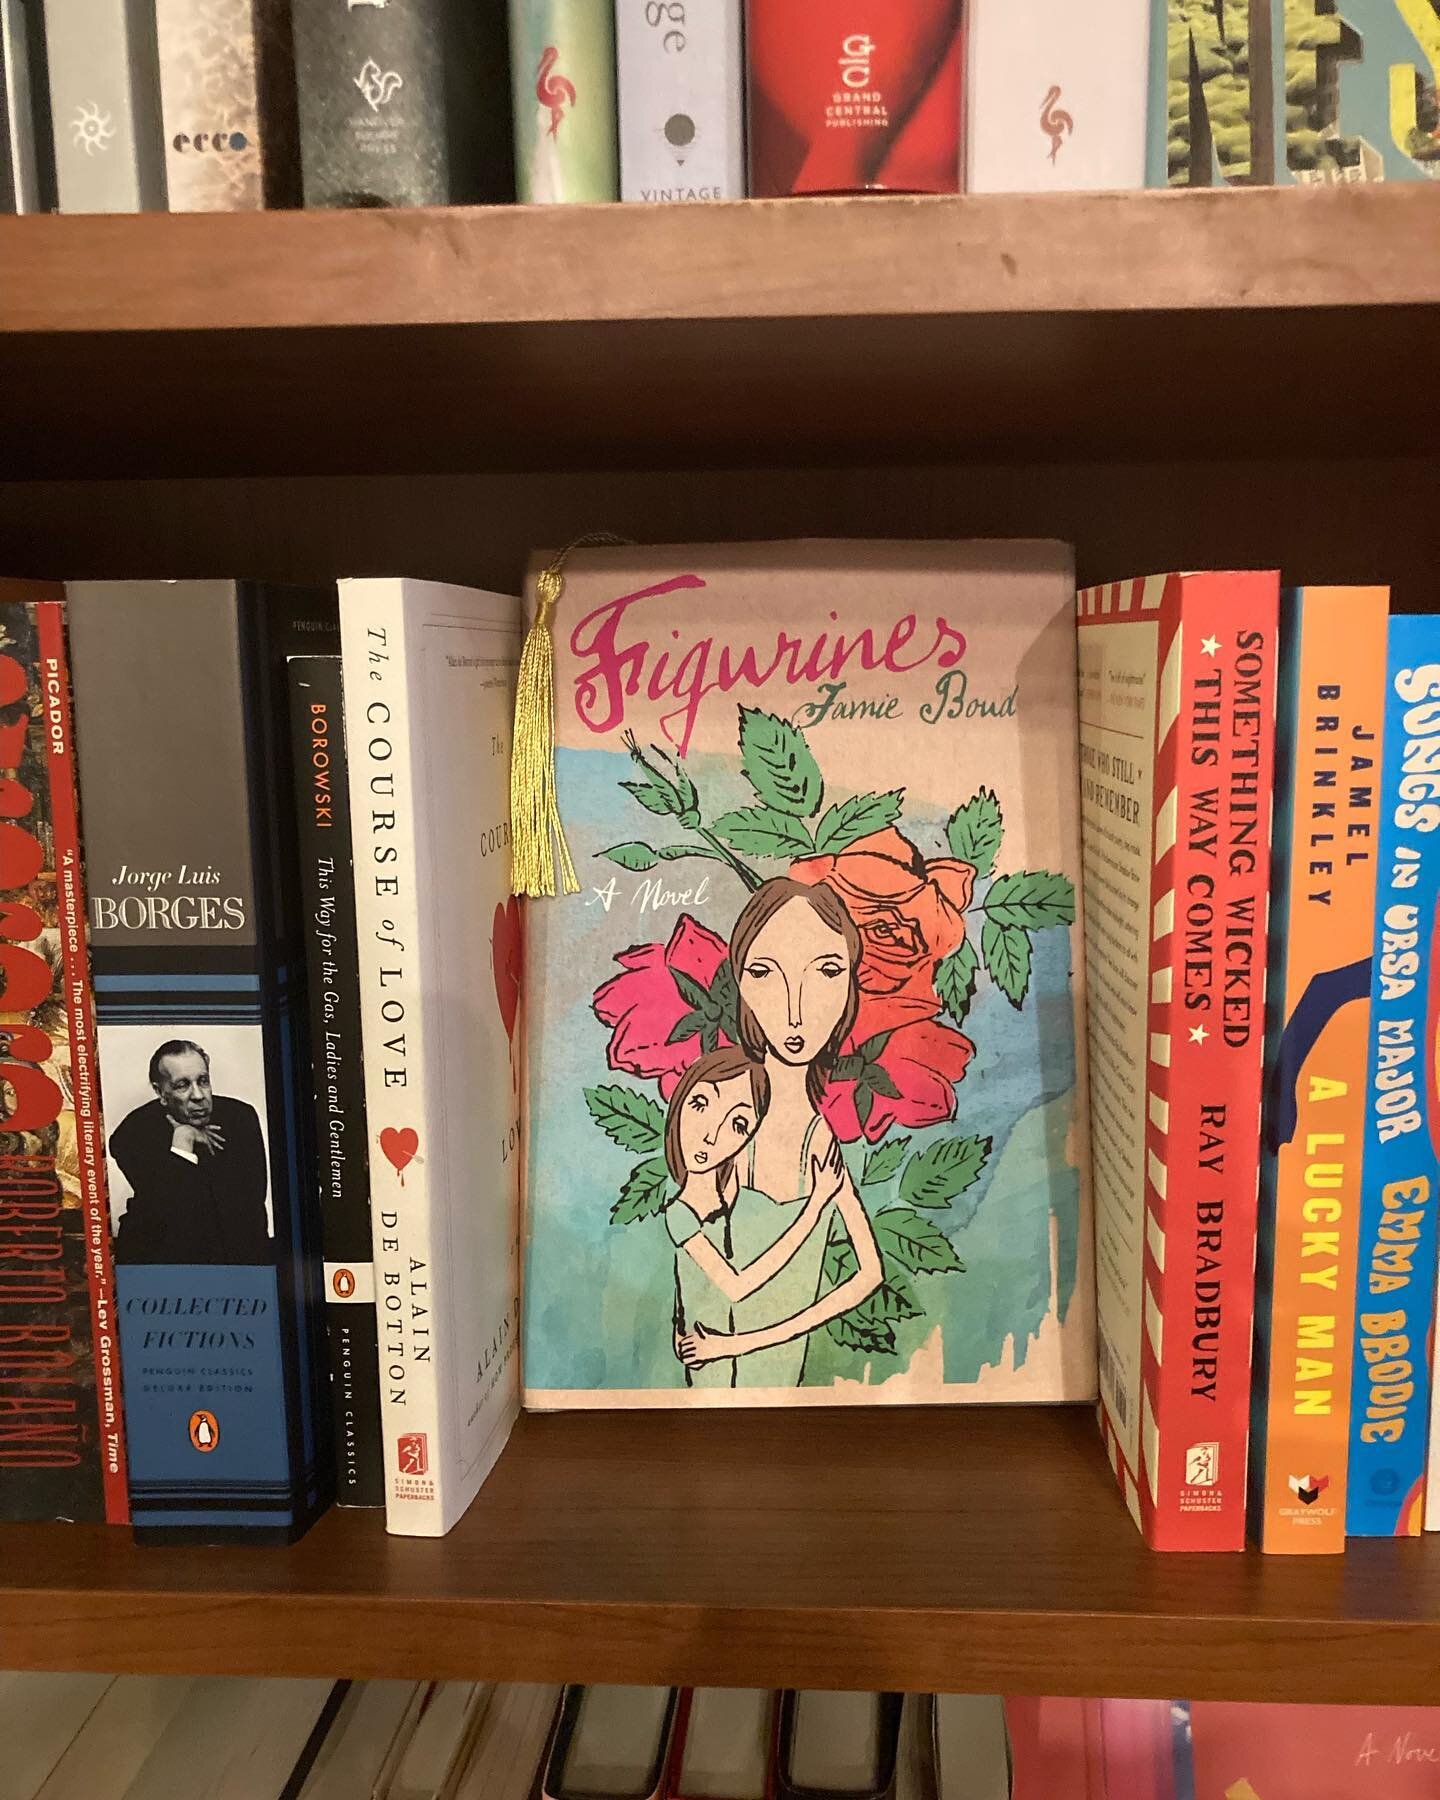 My book, Figurines, now available @spottydogbooks in #hudsonny 🙏